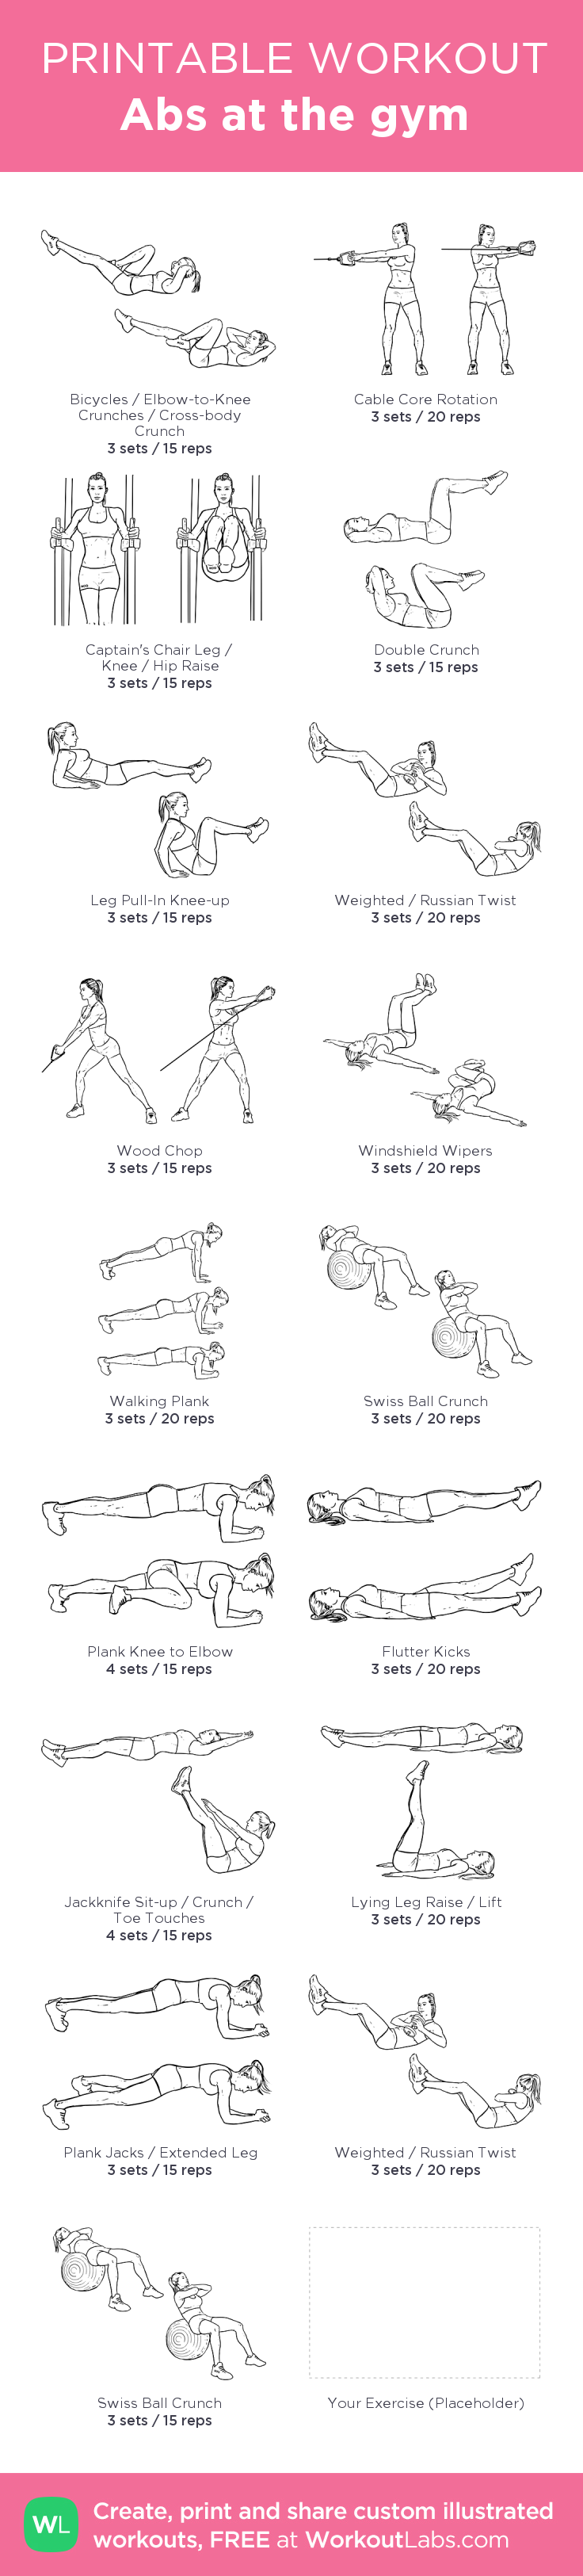 Abs at the gym: my visual workout created at WorkoutLabs.com • Click through to customize and download as a FREE PDF!